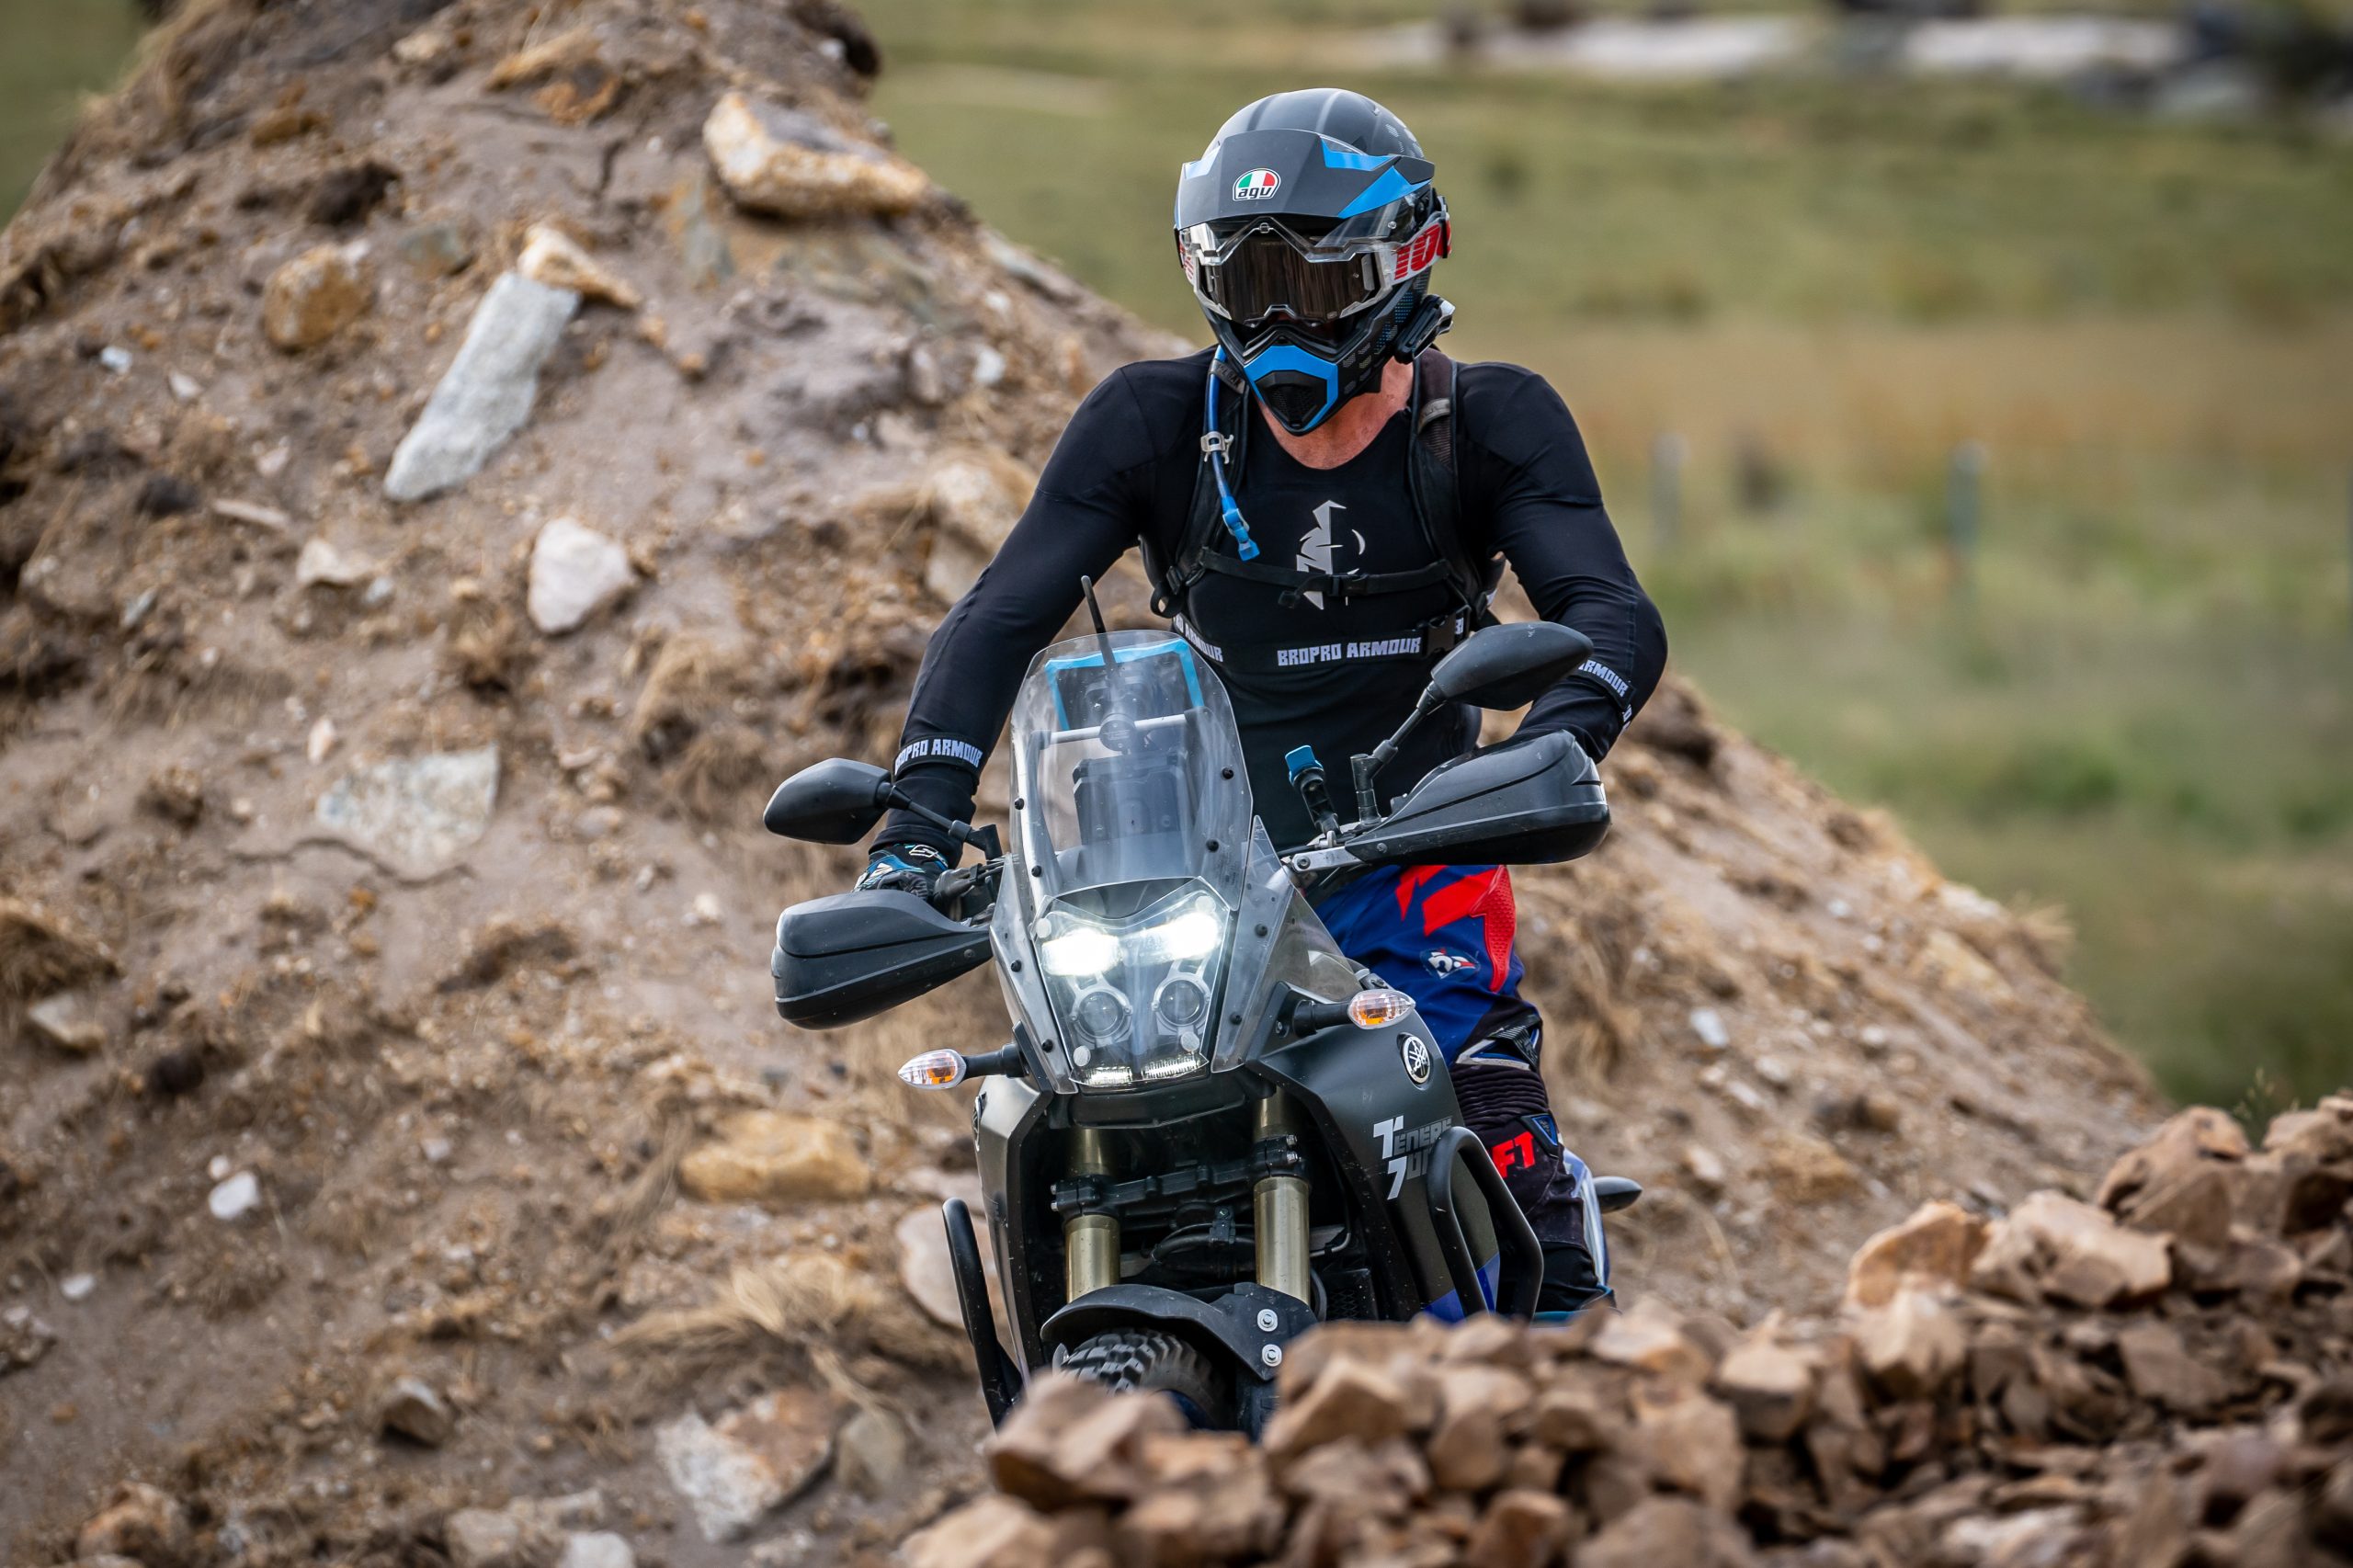 motorcyclist riding on rough terrain with a focused expression